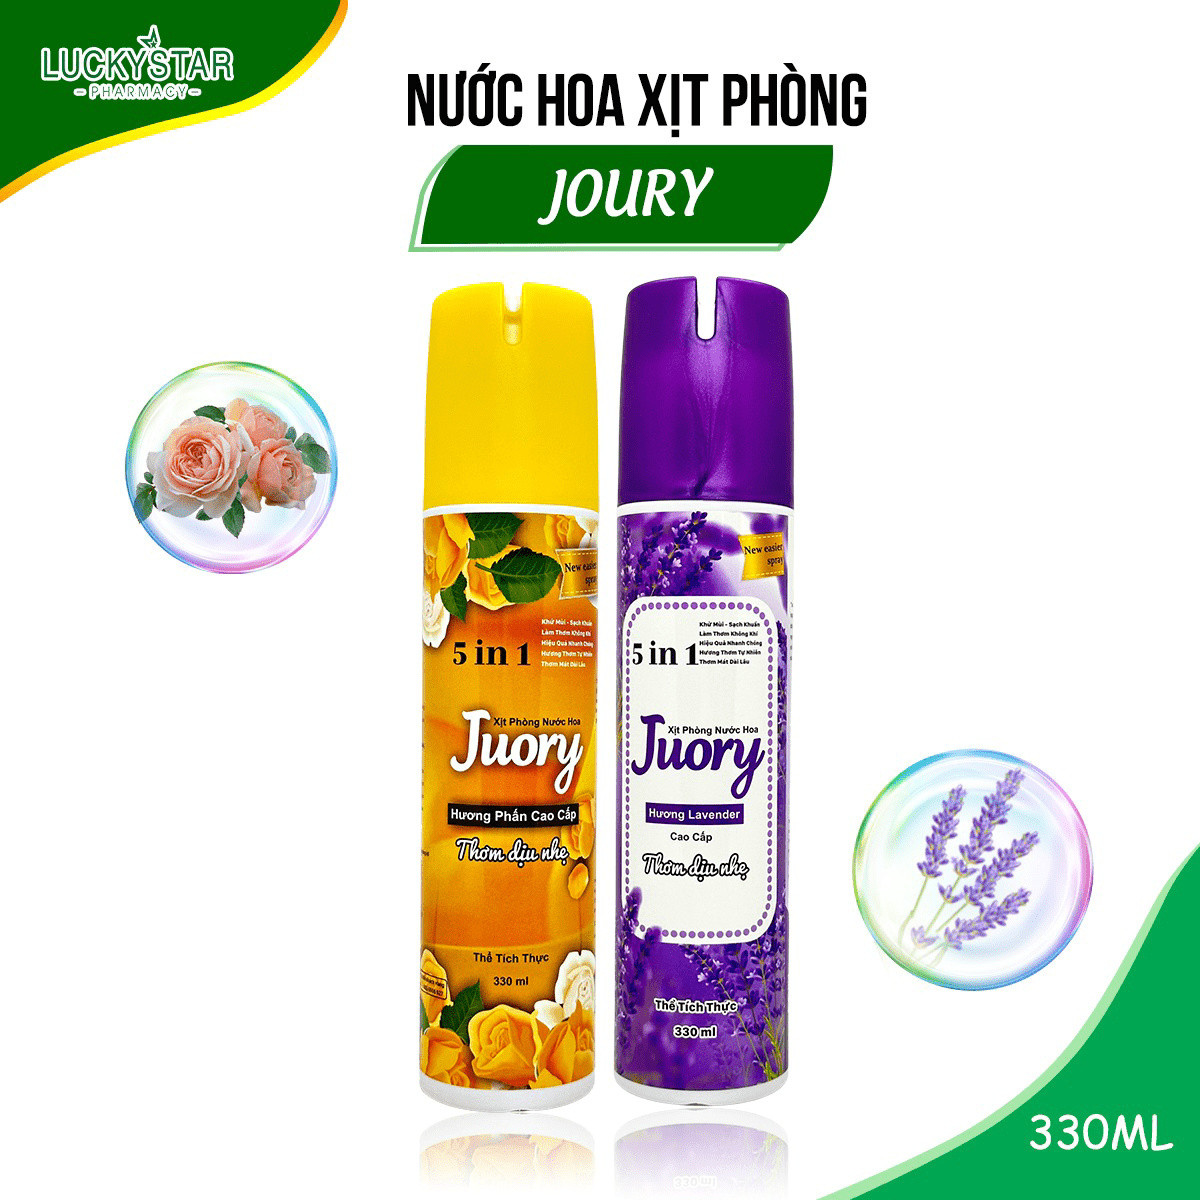 mochanstore.com XIT PHONG NUOC HOA JUORY 5IN1 330ML LUCKY STAR